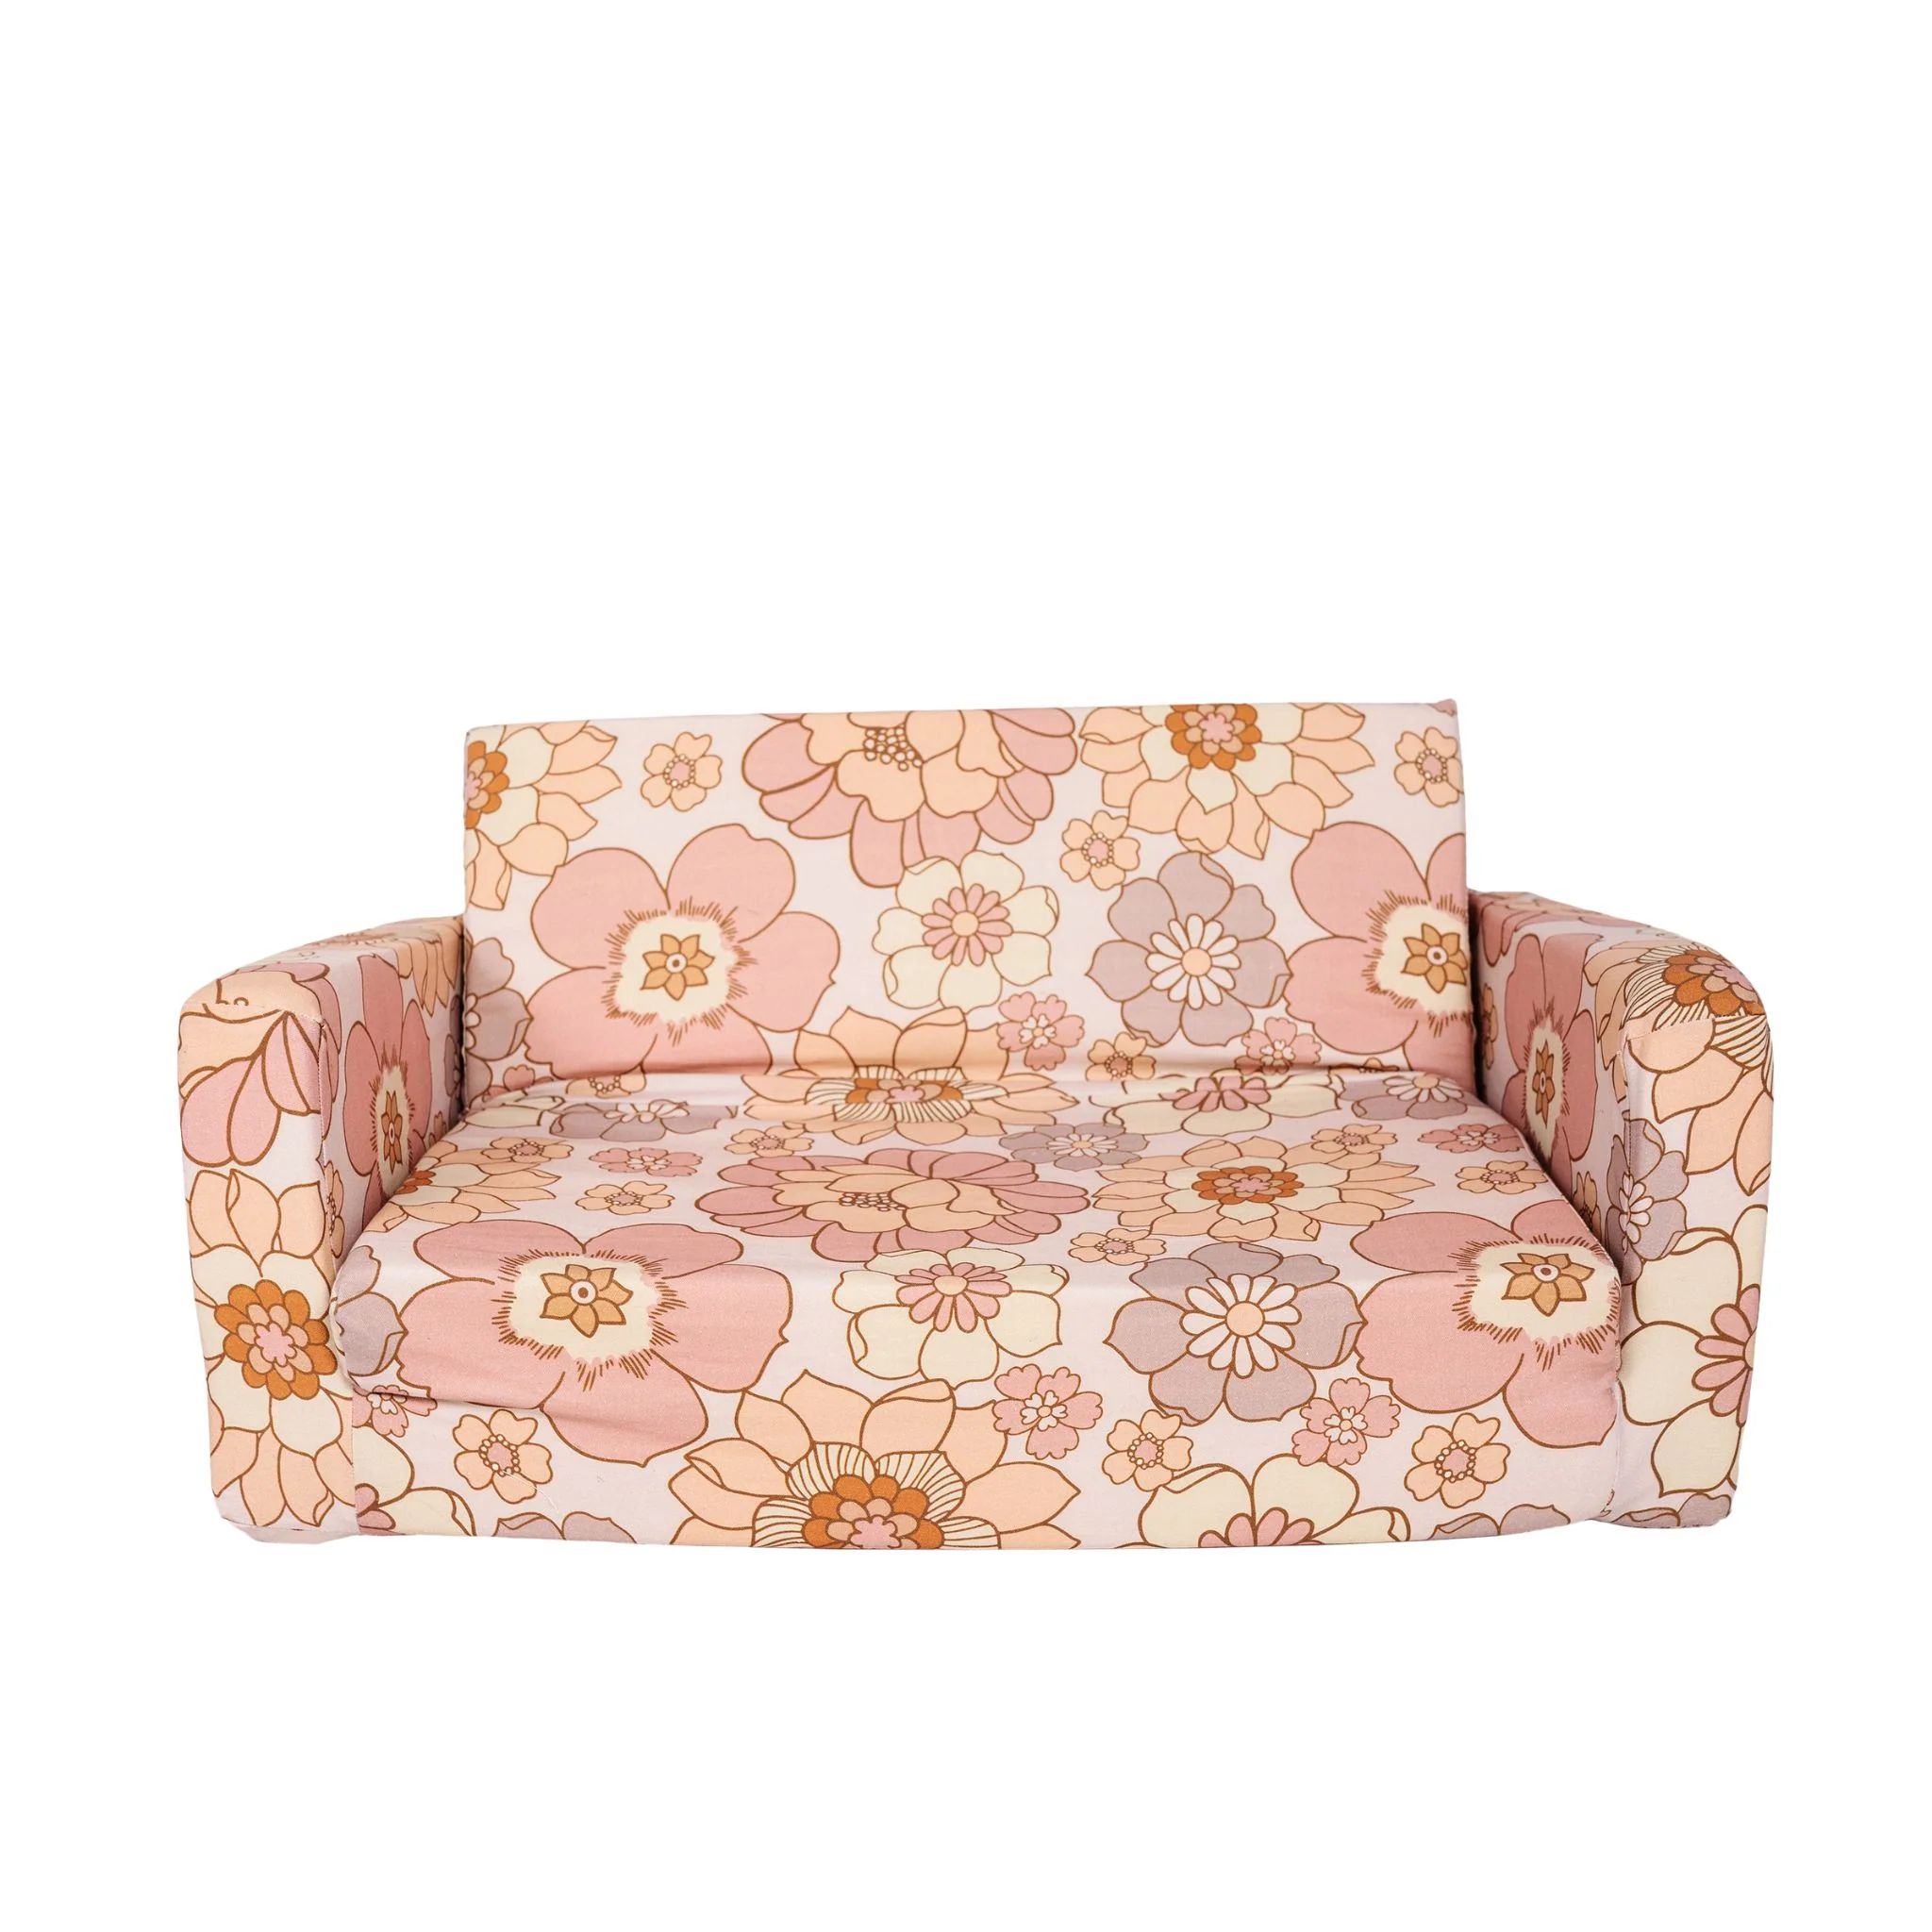 Blooms Play Couch | Toki Mats